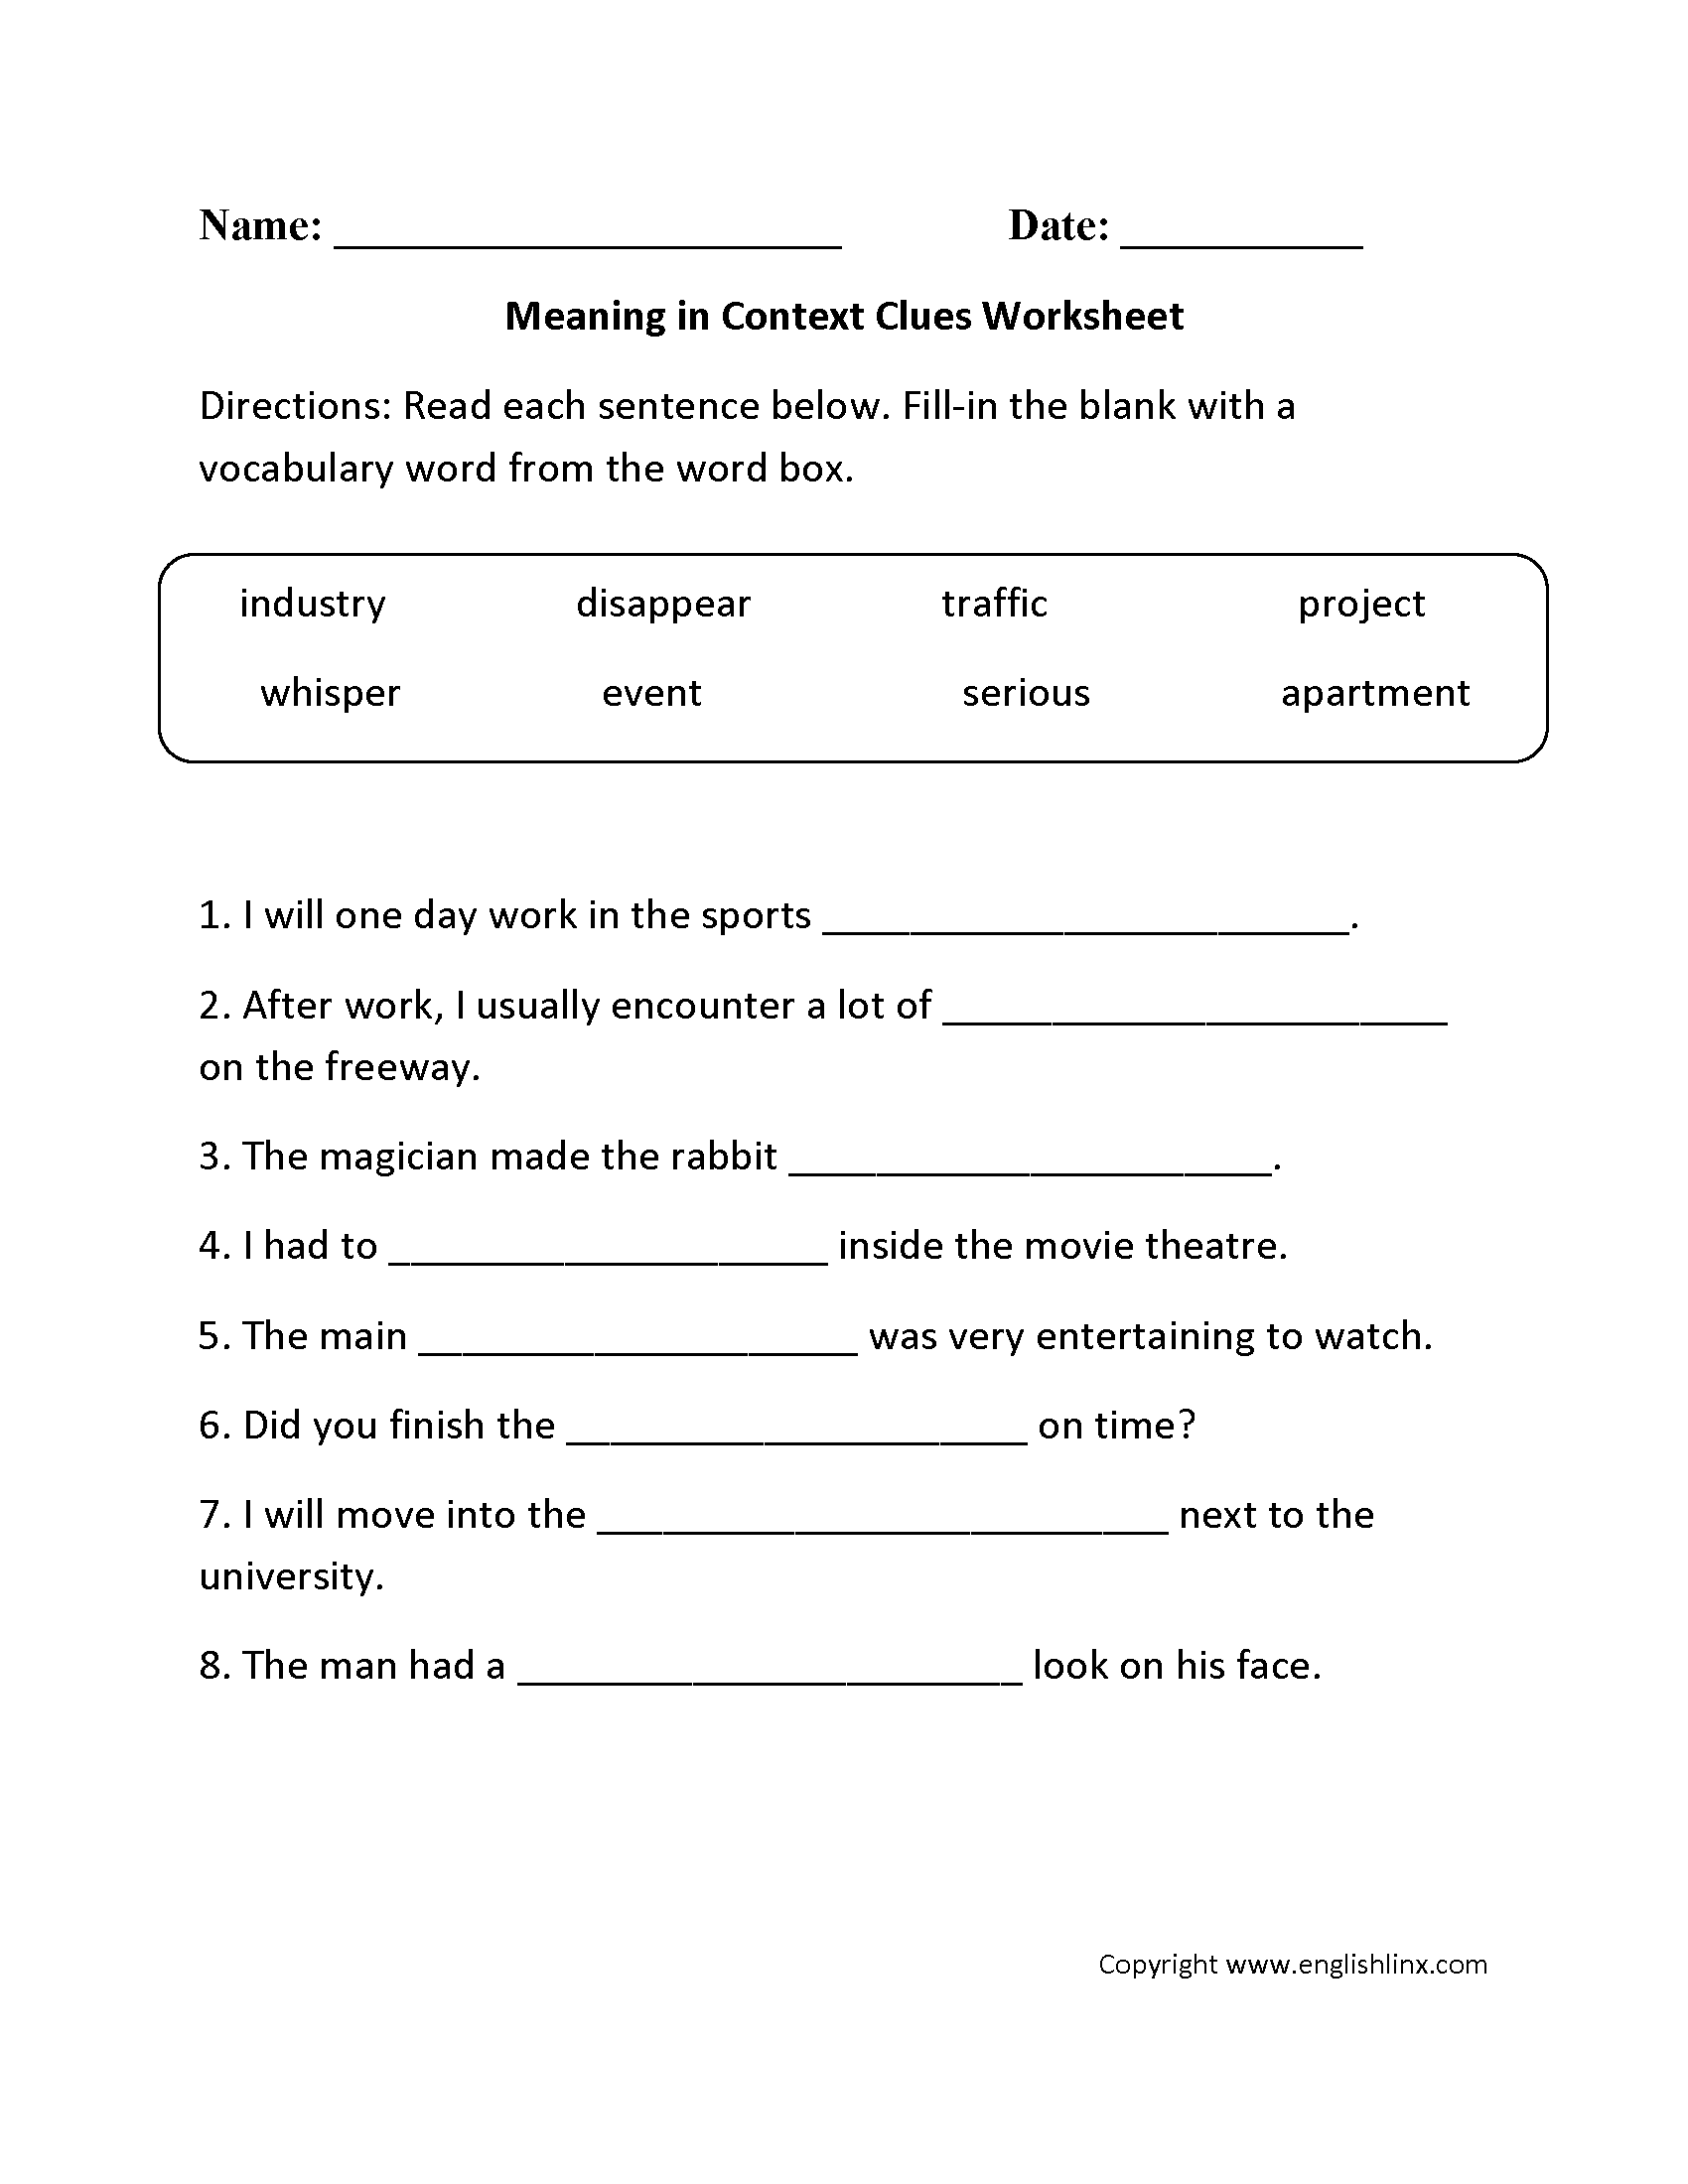 Meaning in Context Clues Worksheet